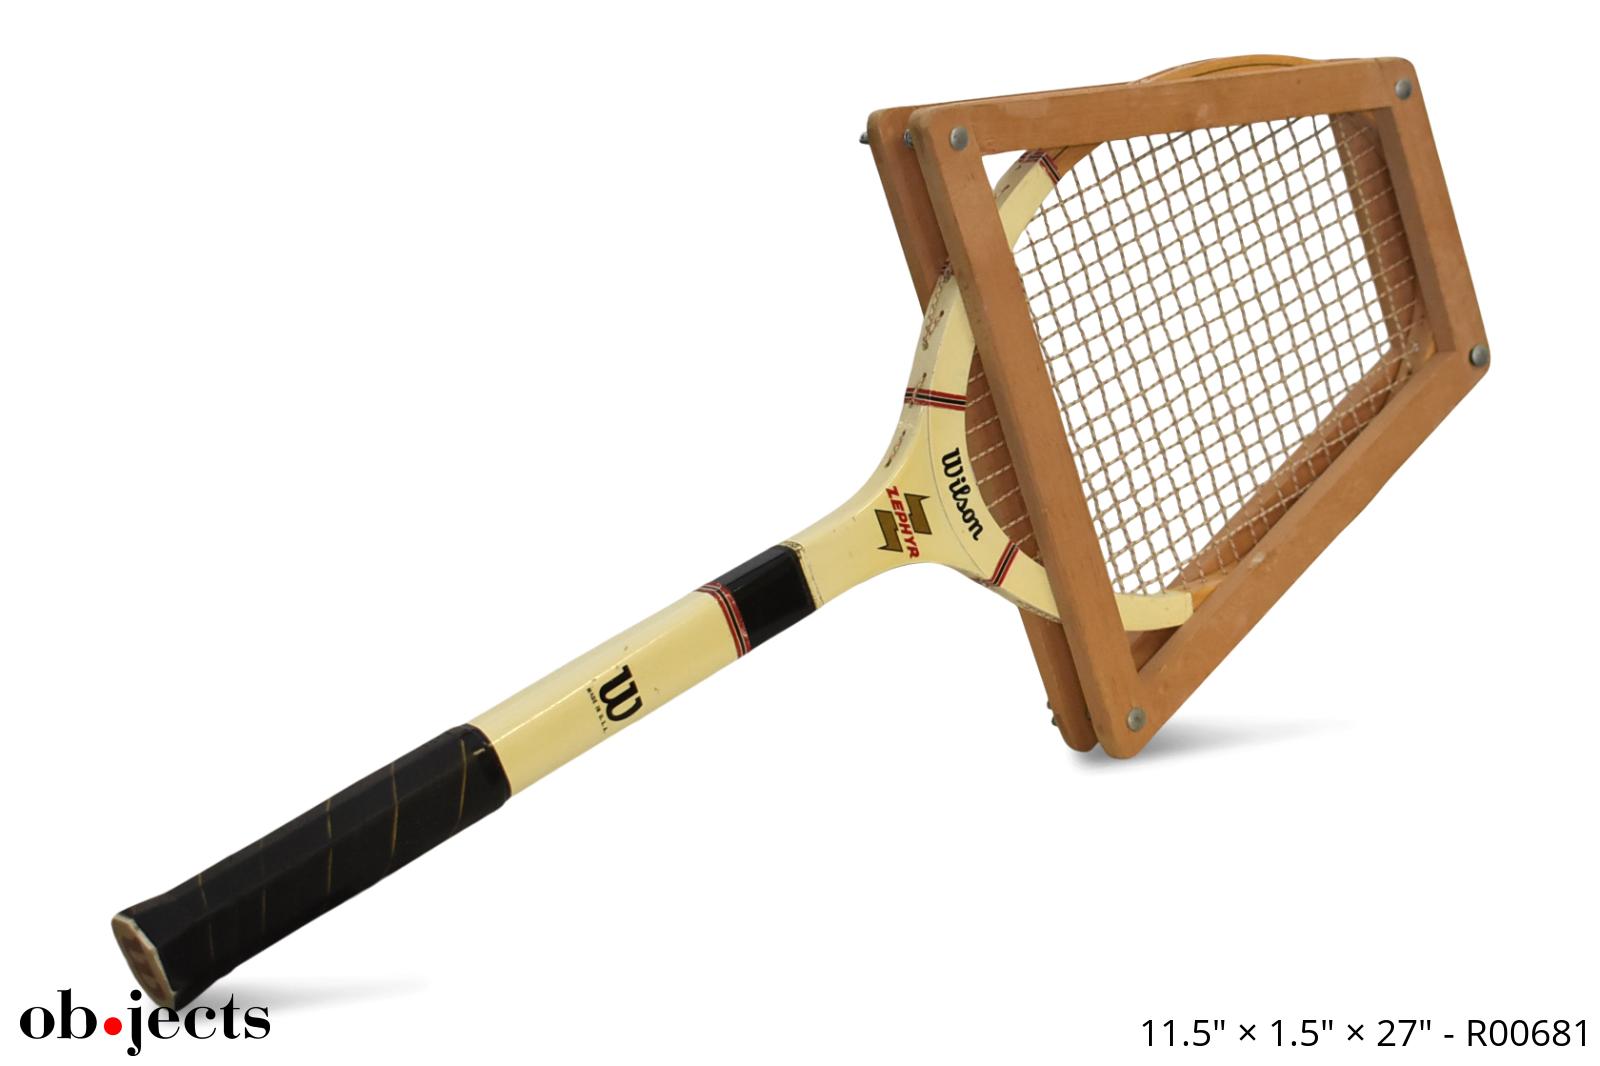 Tennis Racket With Press Protector | Ob•jects